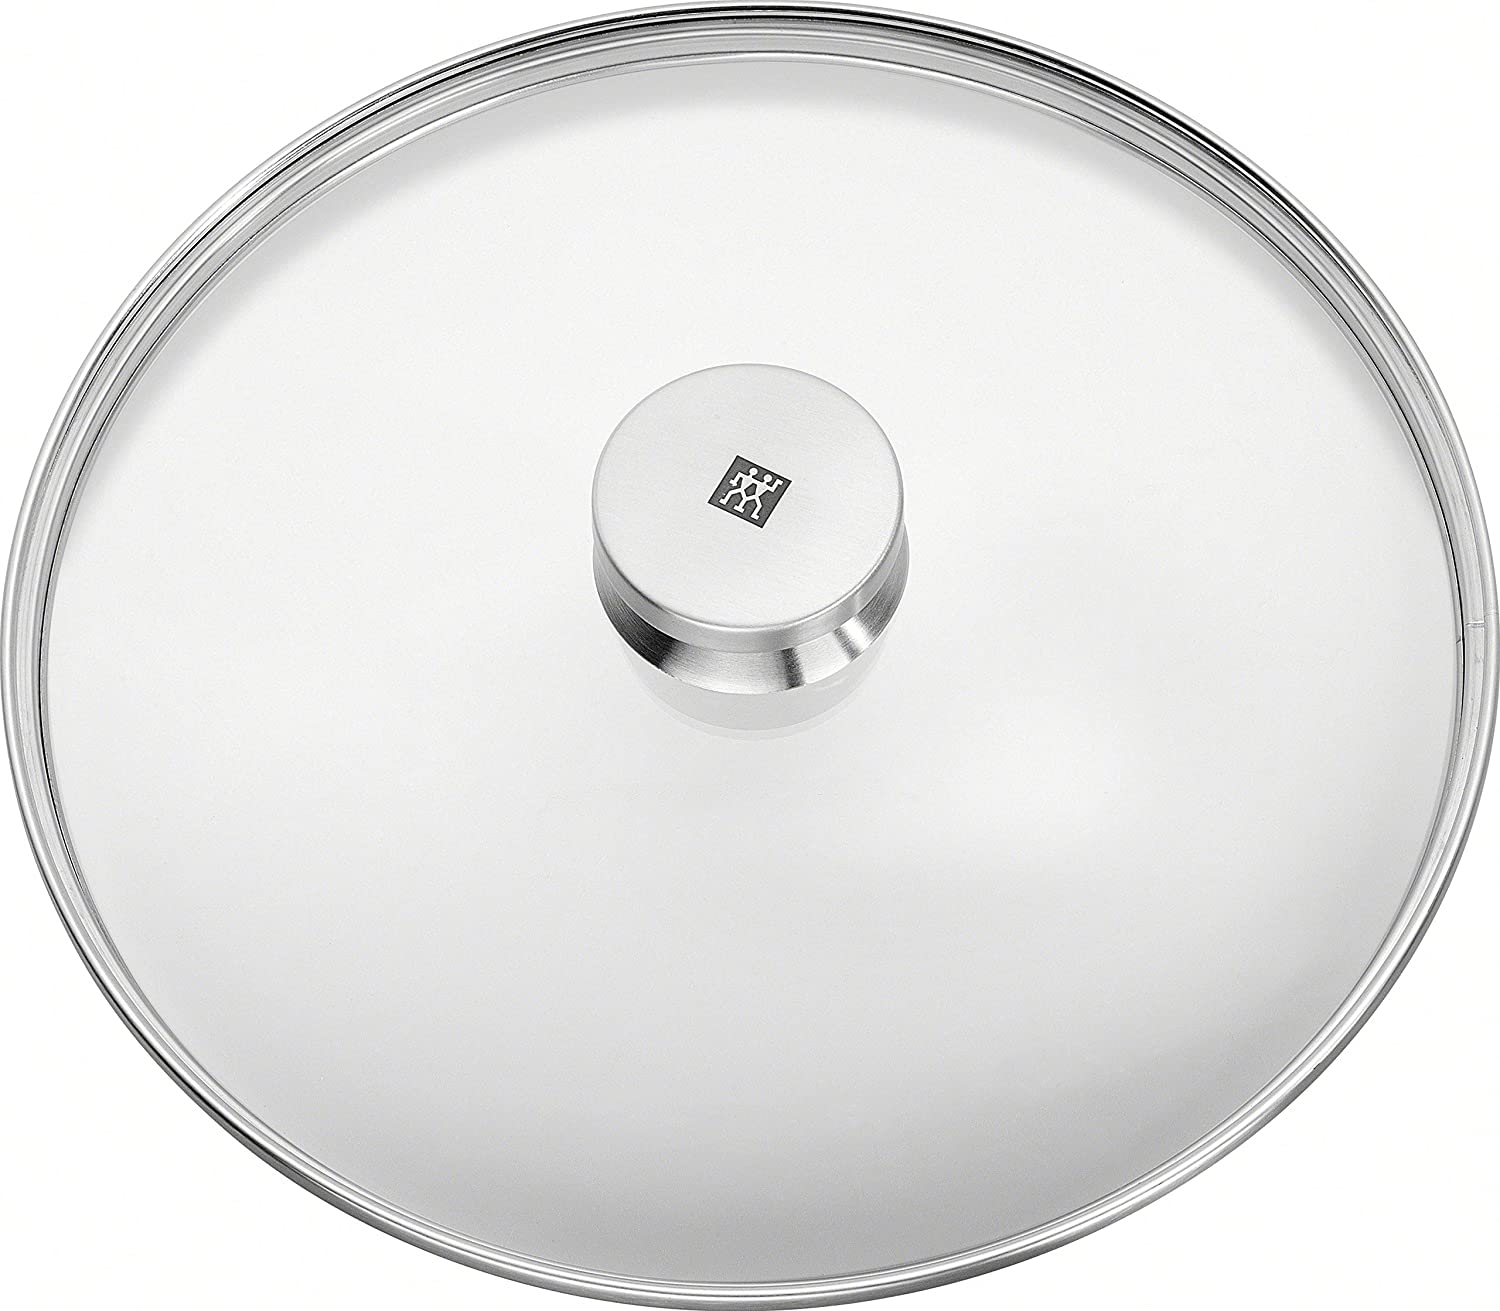 Zwilling 40990-928-0 lid, stainless steel, ø28 cm